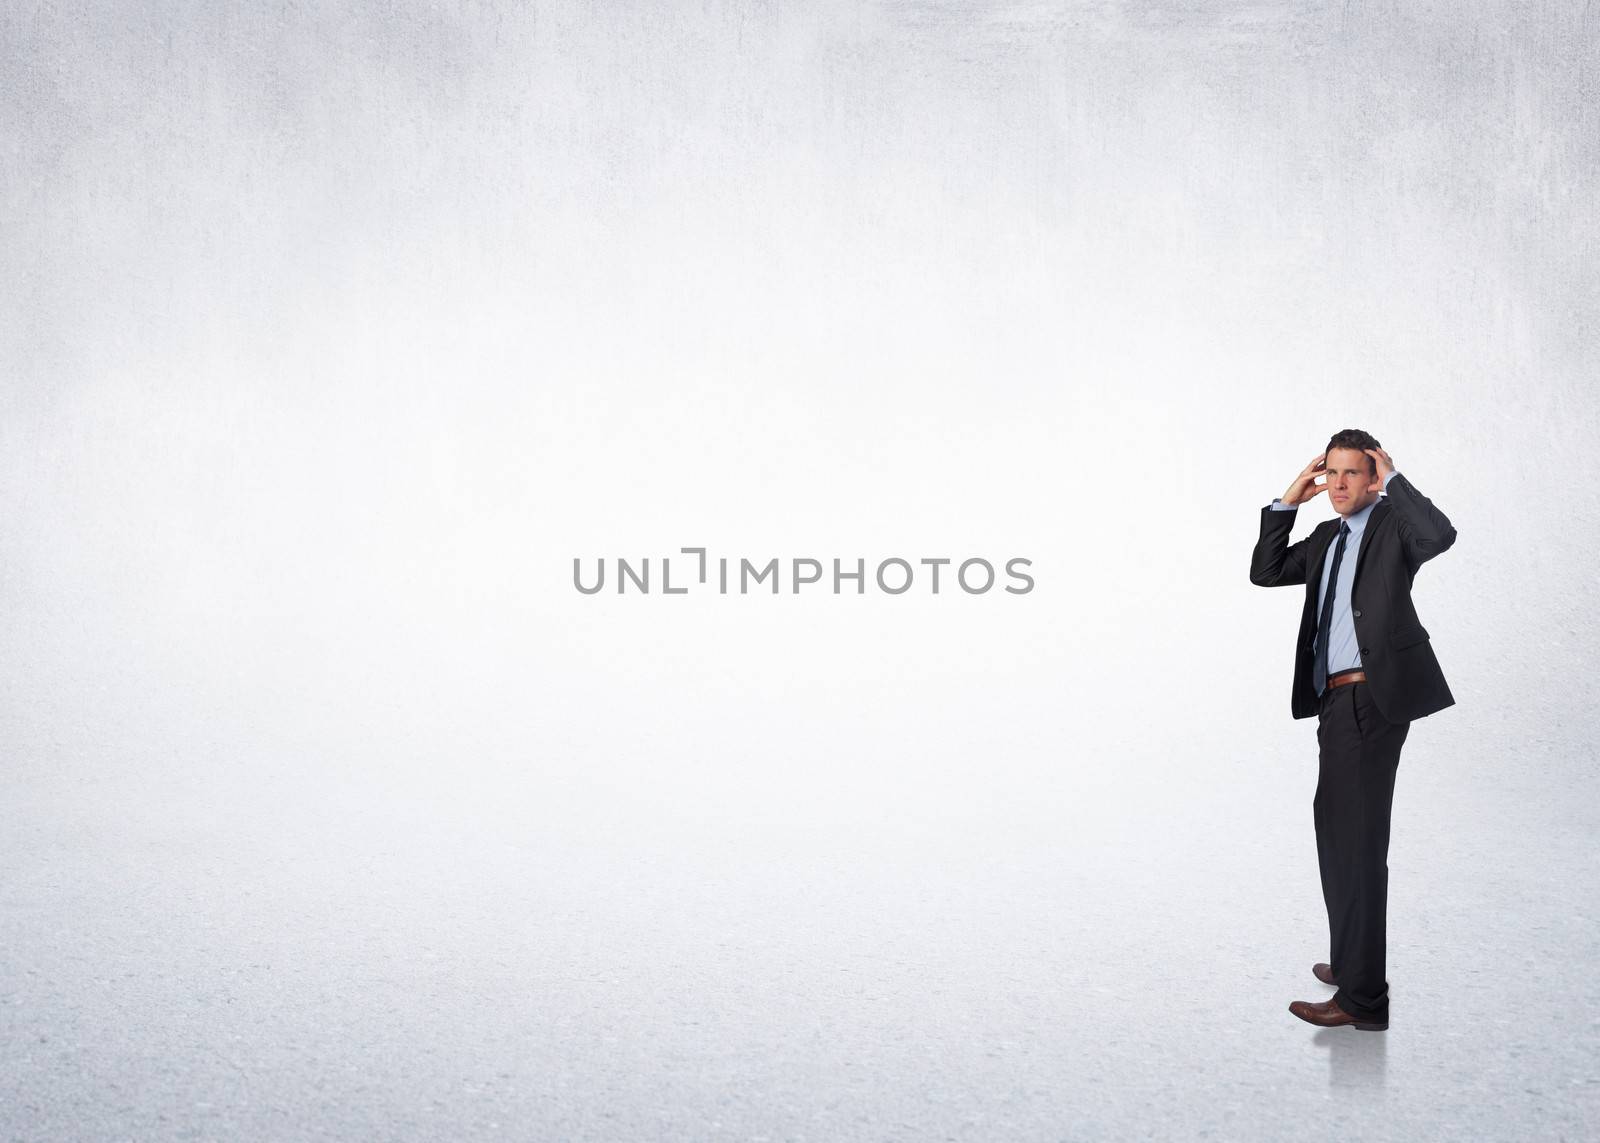 Stressed businessman with hands on head against white wall